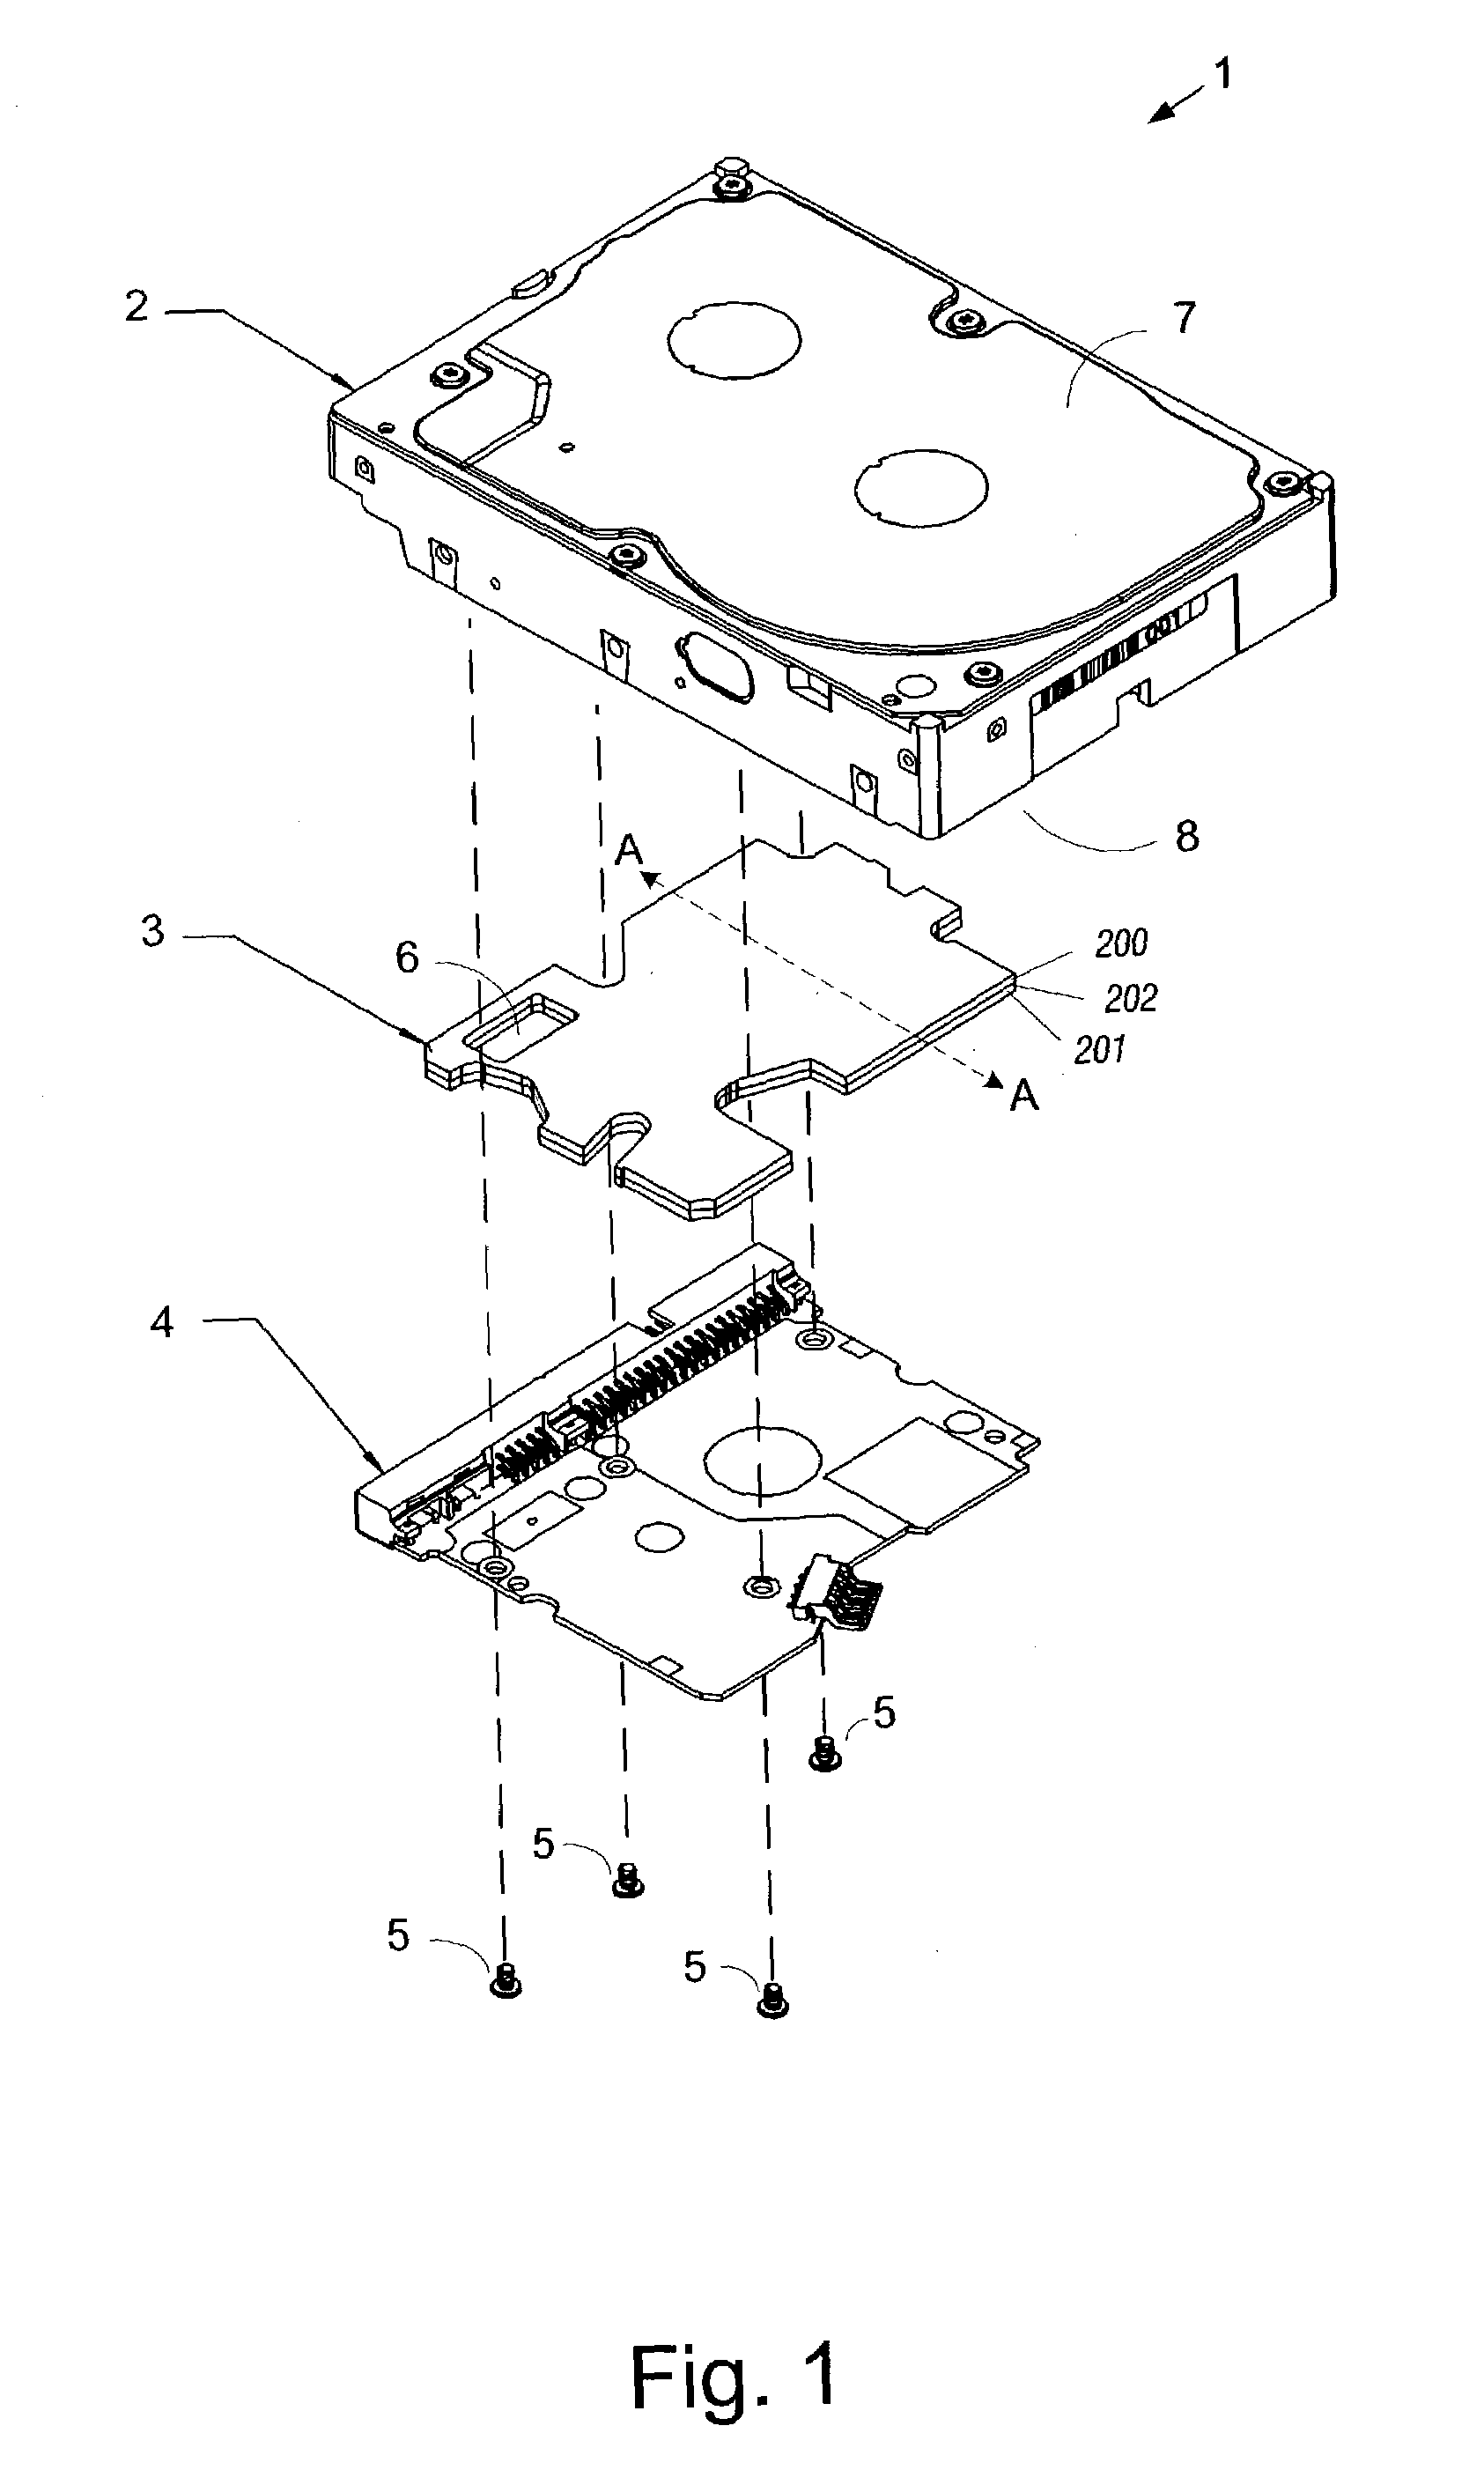 Disk drive having an acoustic damping assembly with an acoustic barrier layer